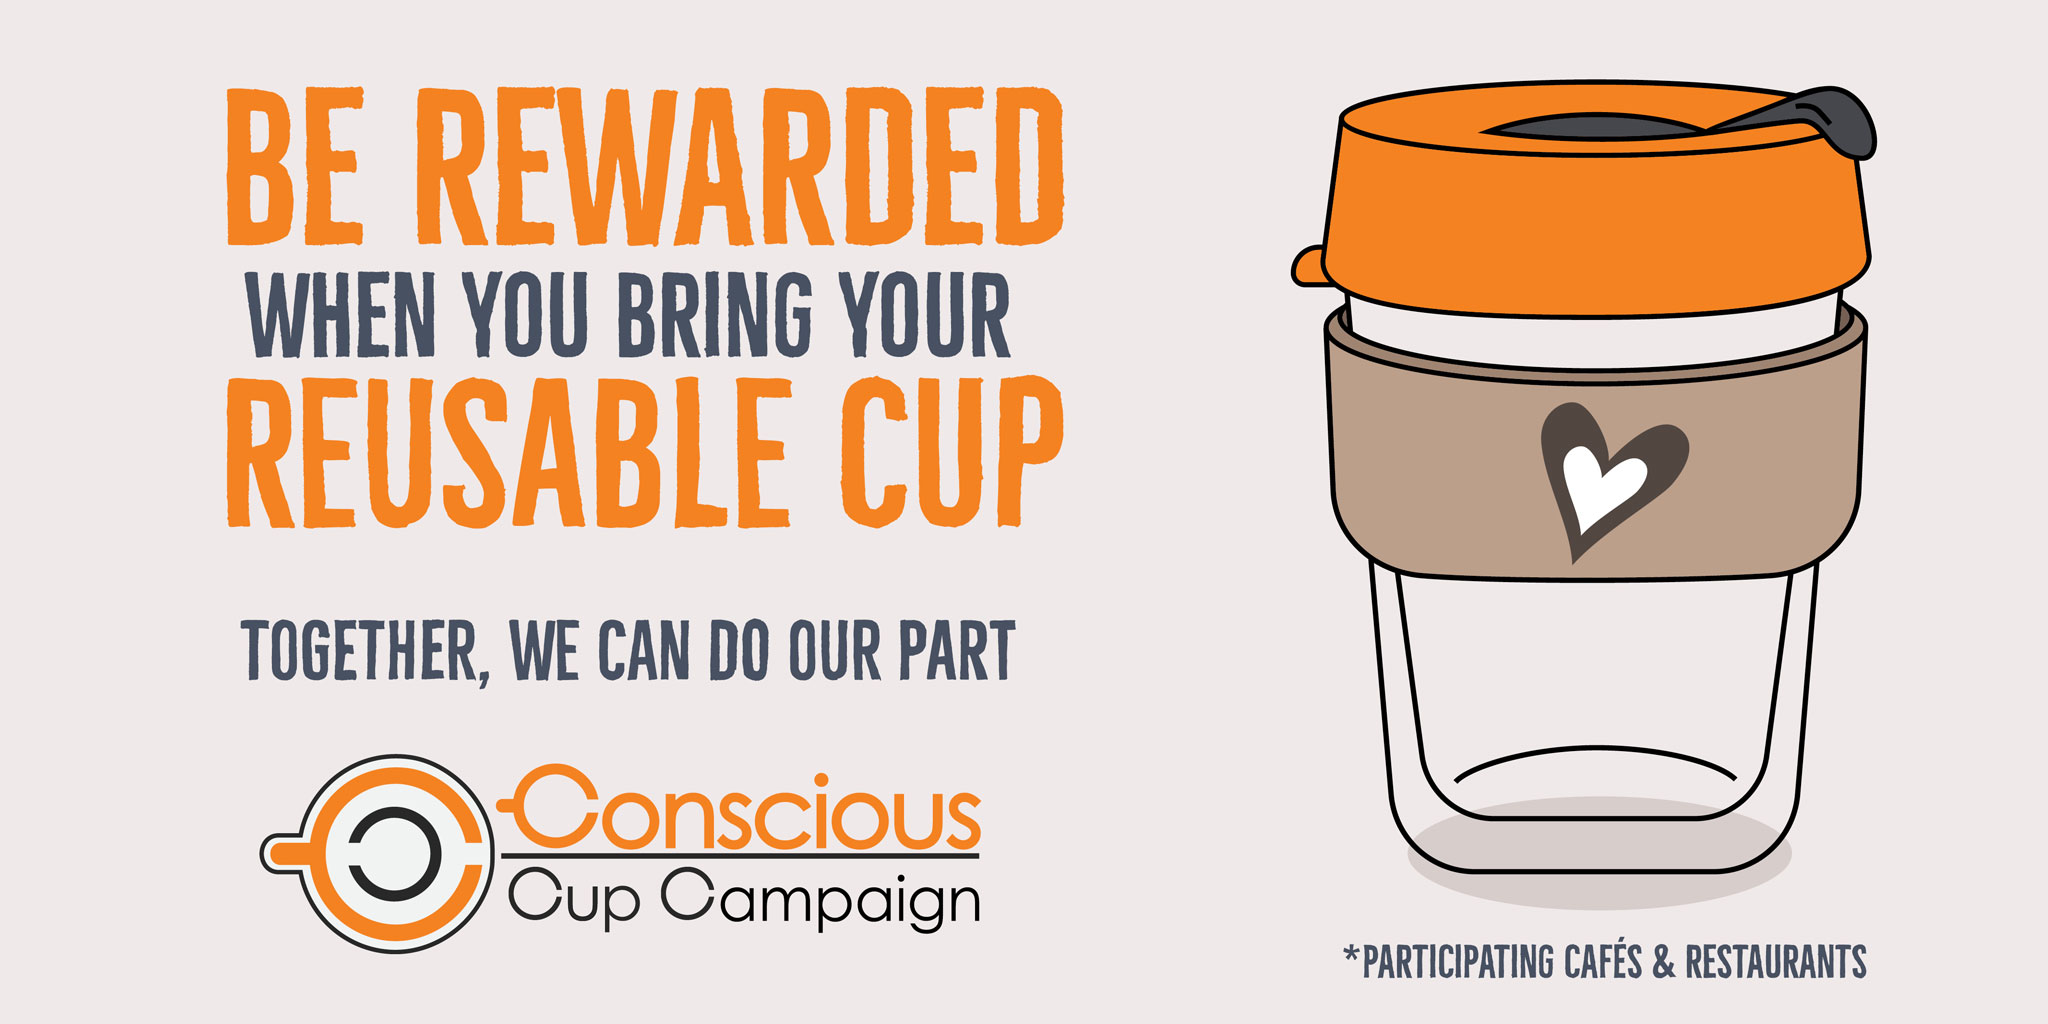 Twitter, Be Rewarded when you use your Reusable Cup